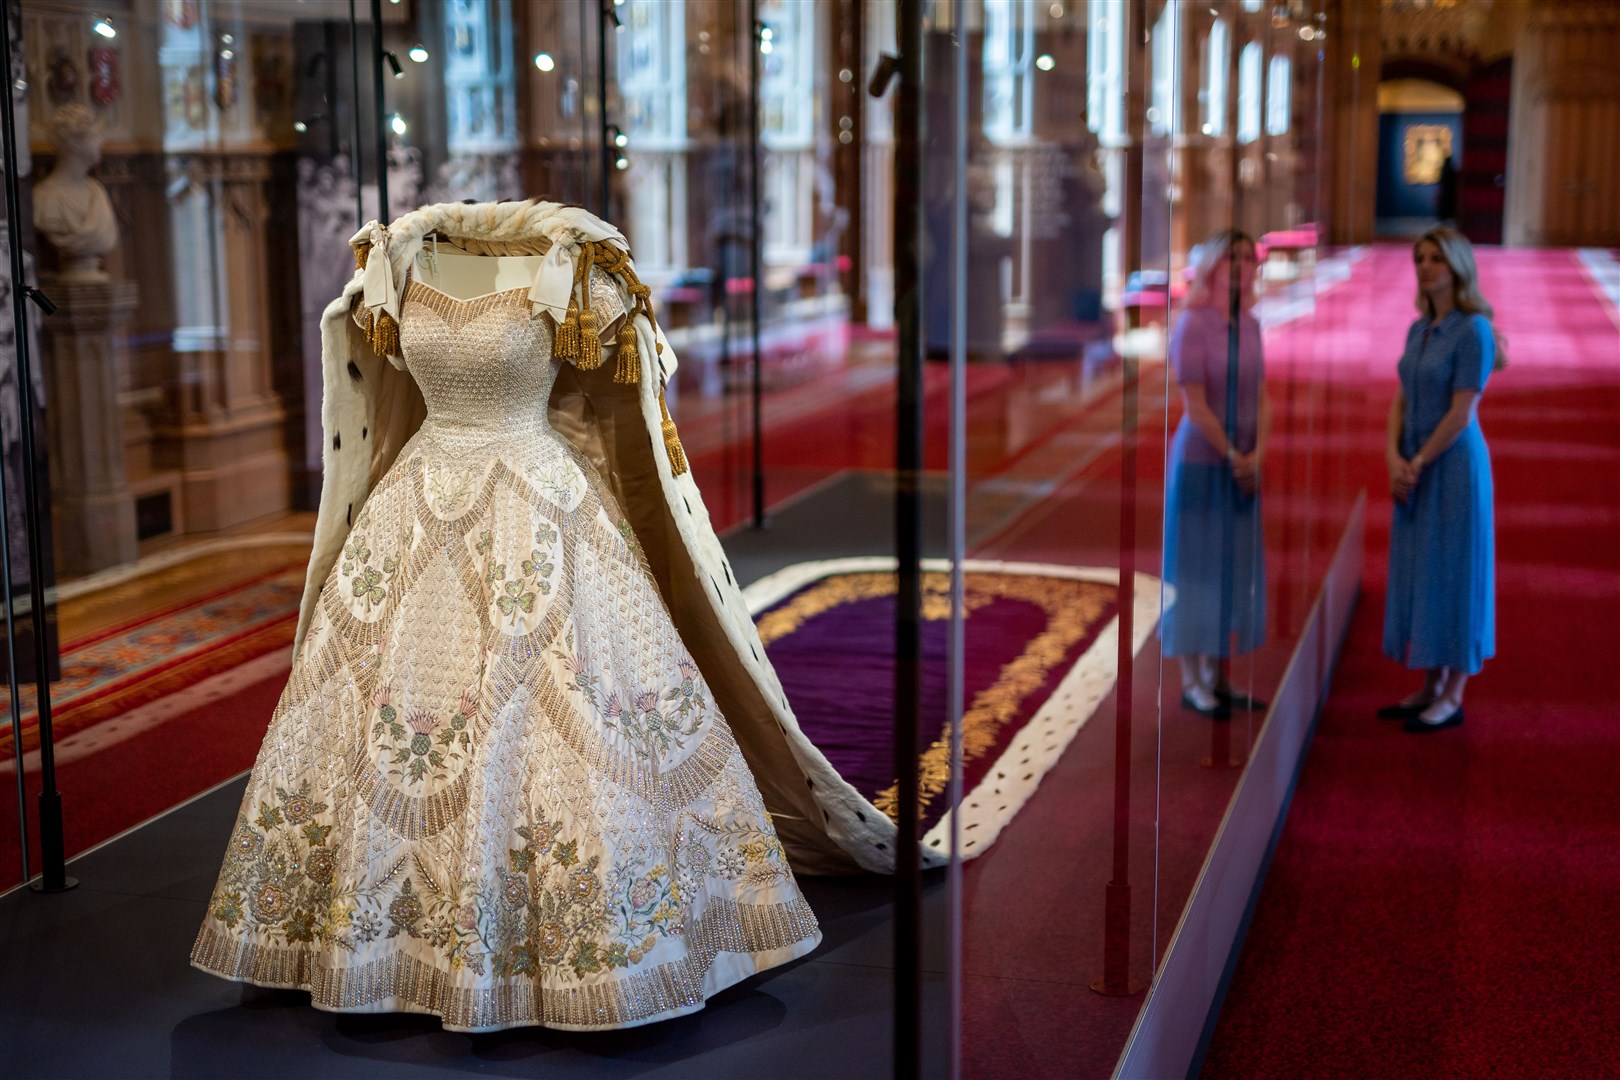 The Queen’s Coronation dress on display at Windsor Castle (Aaron Chown/PA)